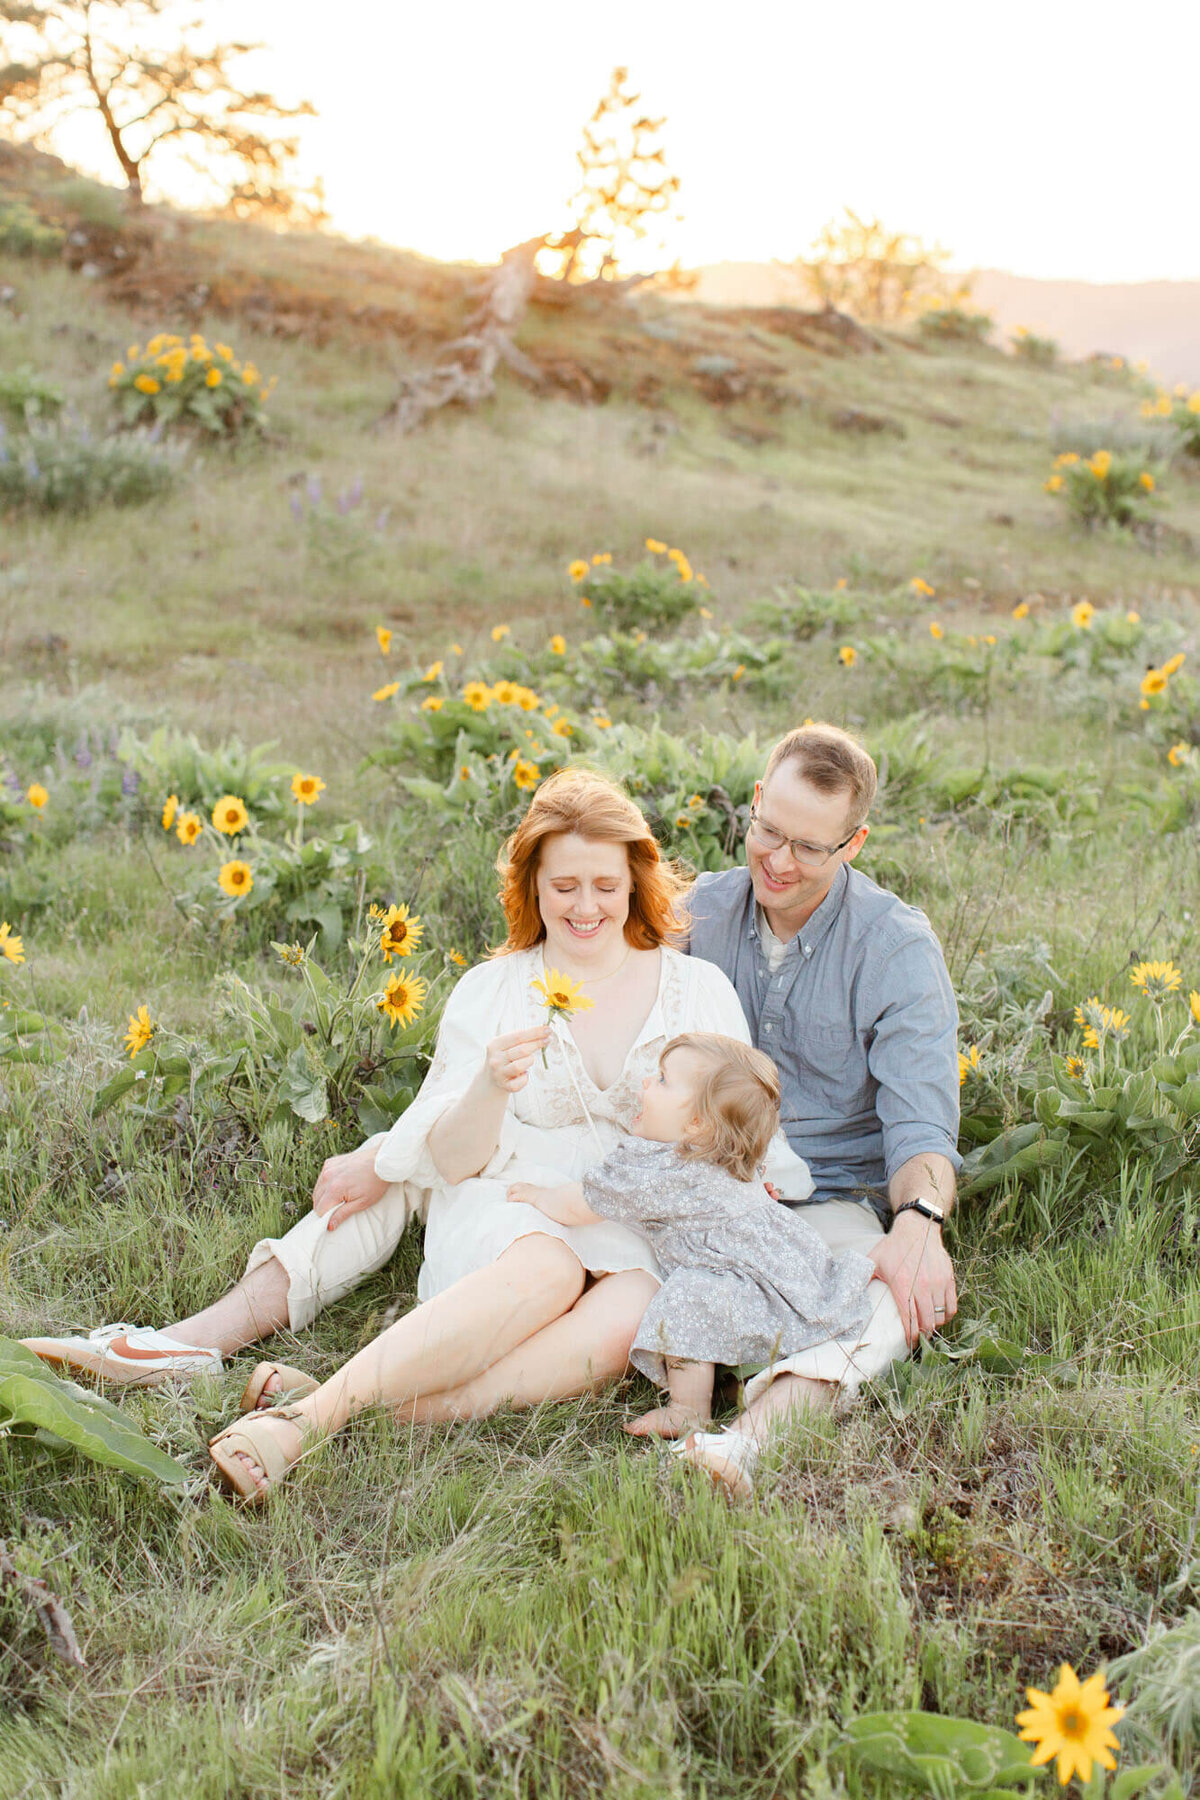 Mom, Dad and one year old girl sitting in a field of yellow wildflowers together. Mom is holding up a flower and little girl is looking up at it and smiling. Dad is sitting behind them and smiling at them. They are wearing shades of white, blue and grey.